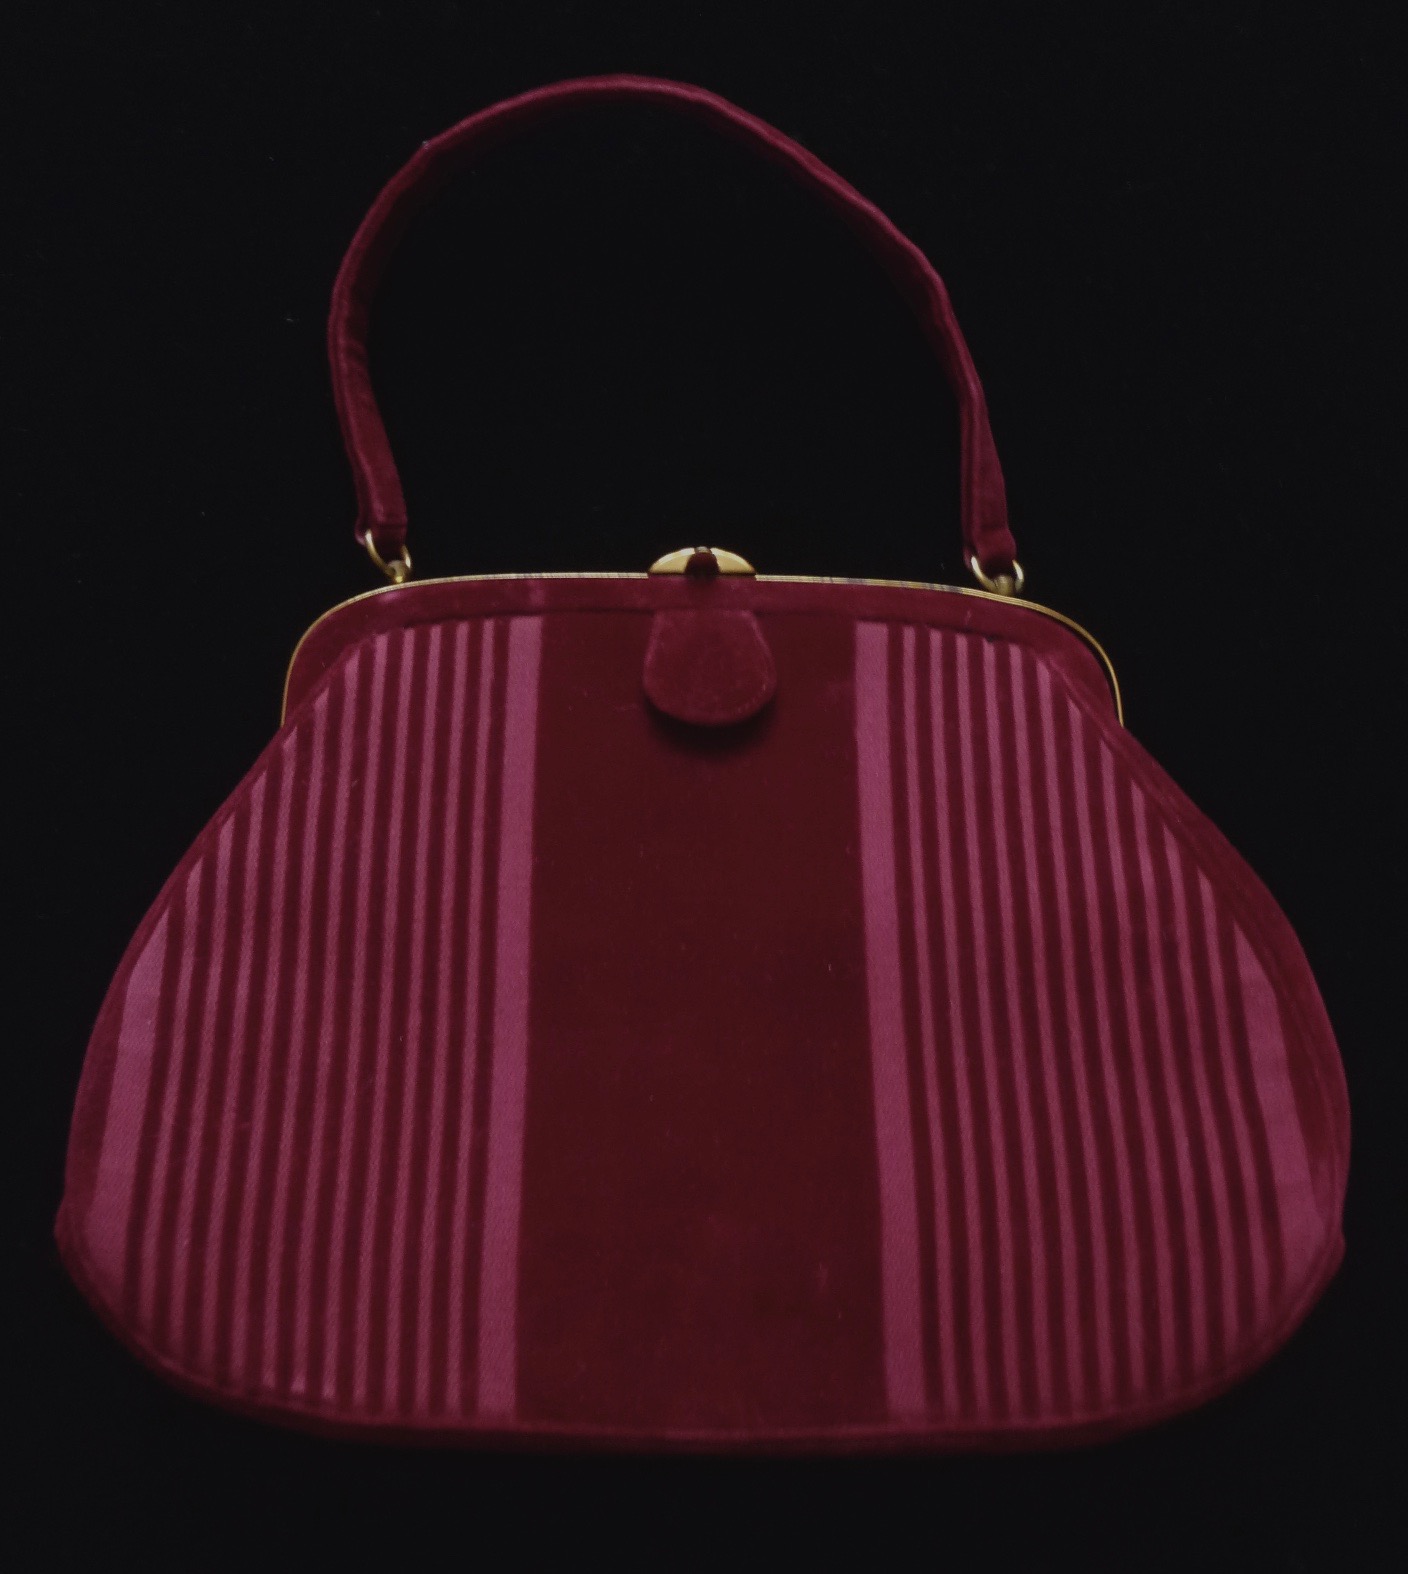 SPECIAL POST! Article about Morris Moskowitz, Premier Handbag Manufacturer  - With input from his family